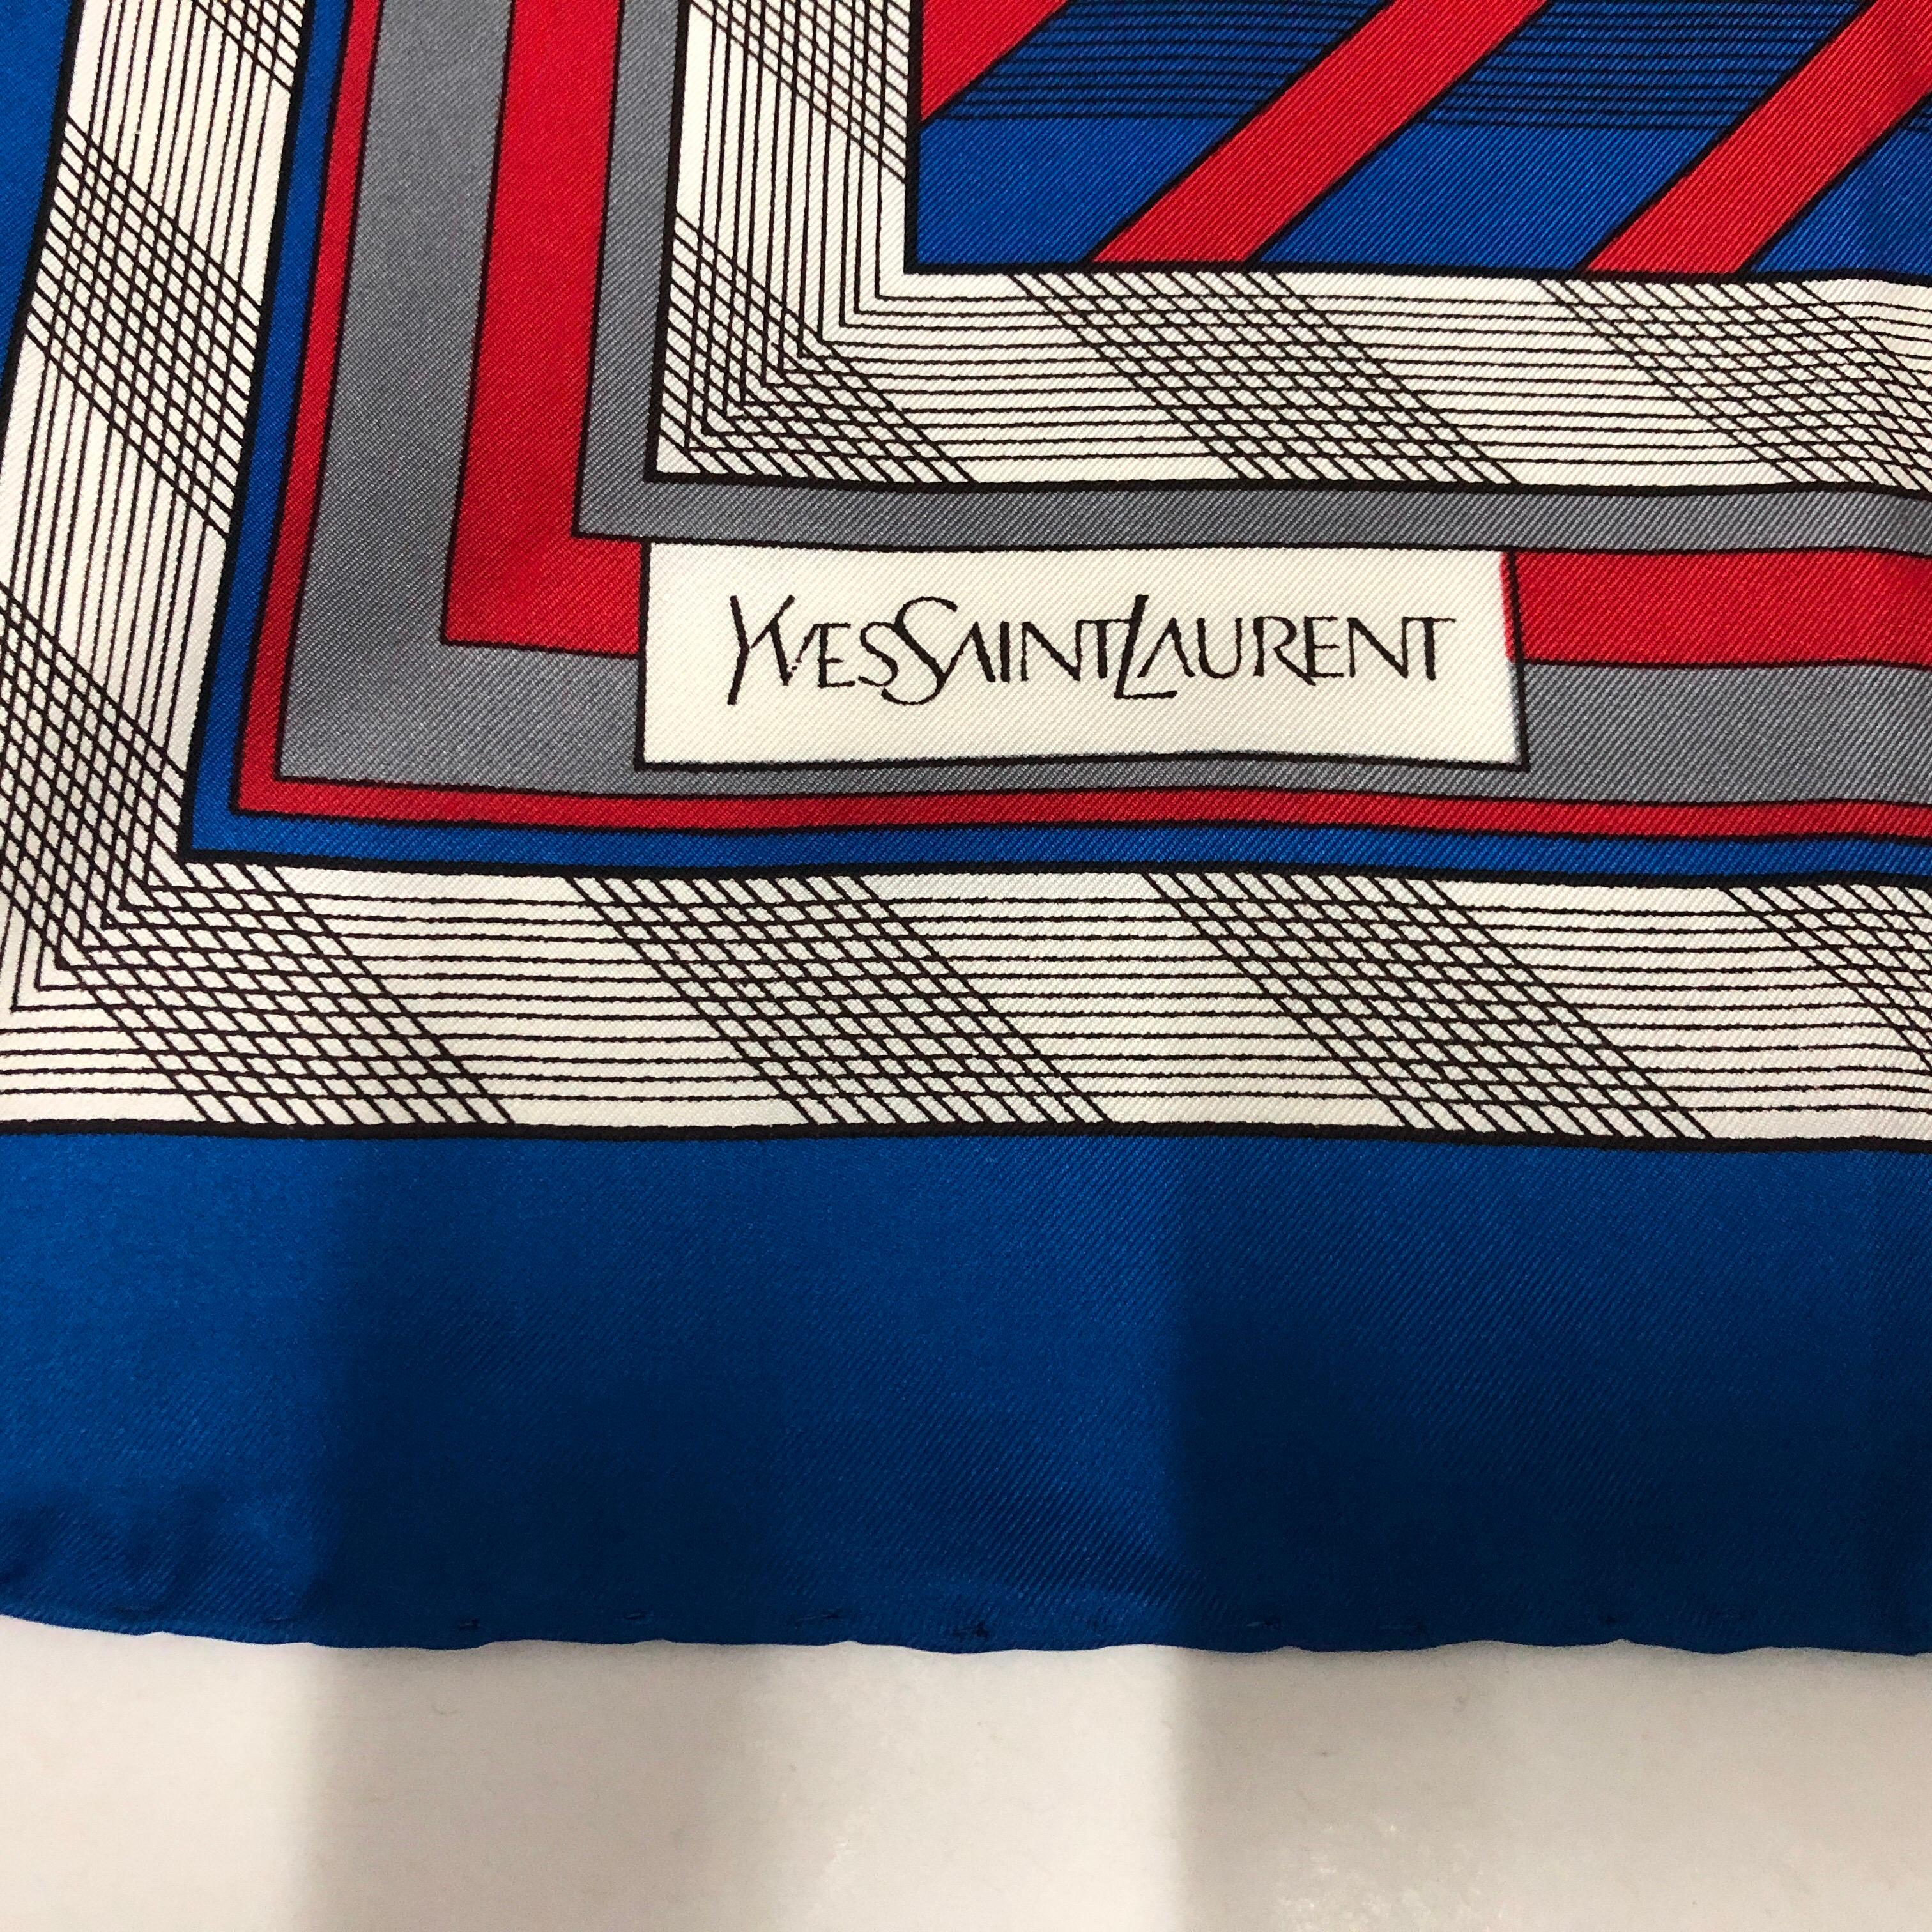 A particular scarf made by Yves Saint Laurent in perfect conditions